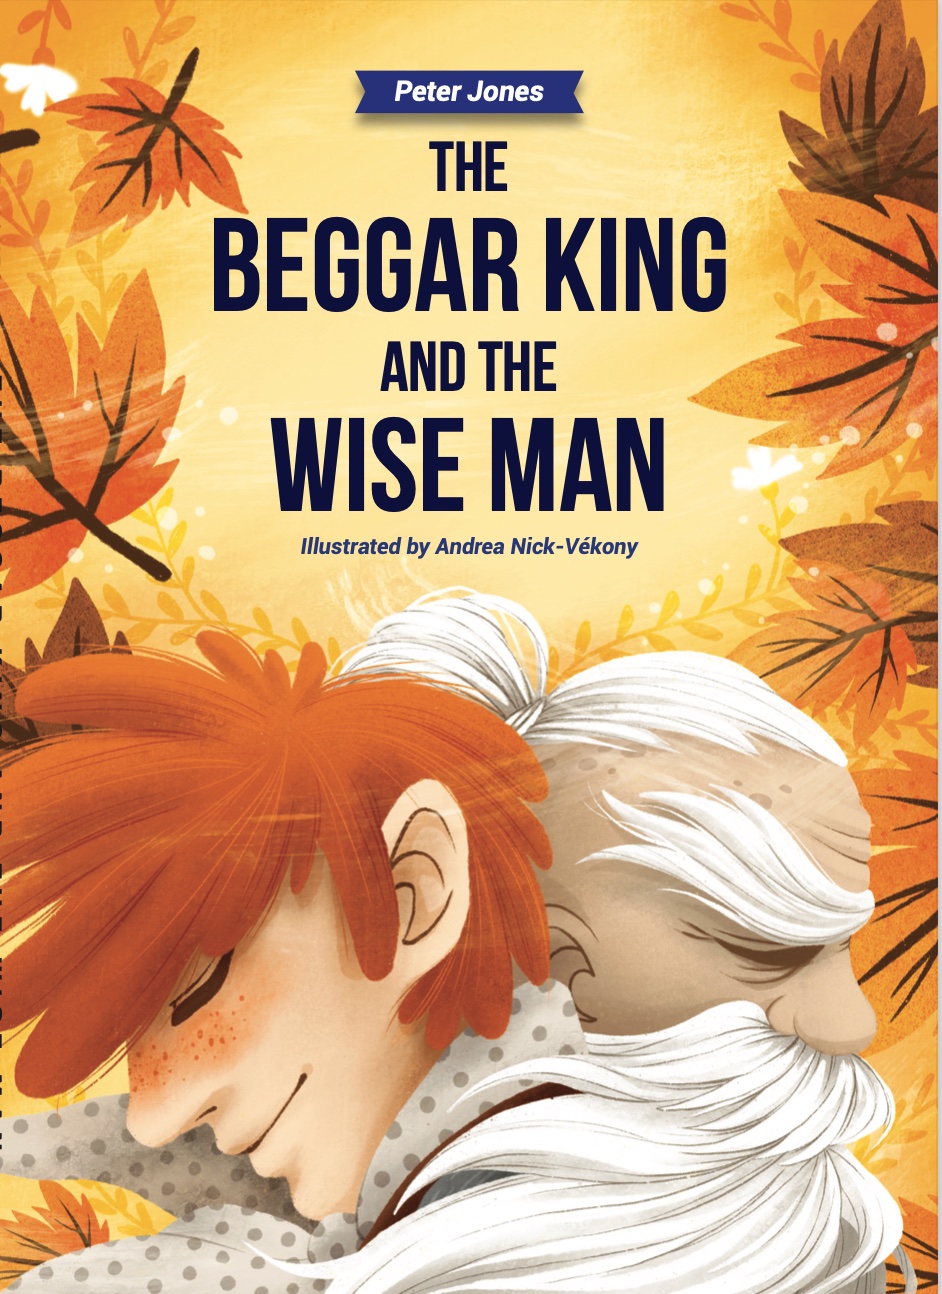 The beggar king and the wise man